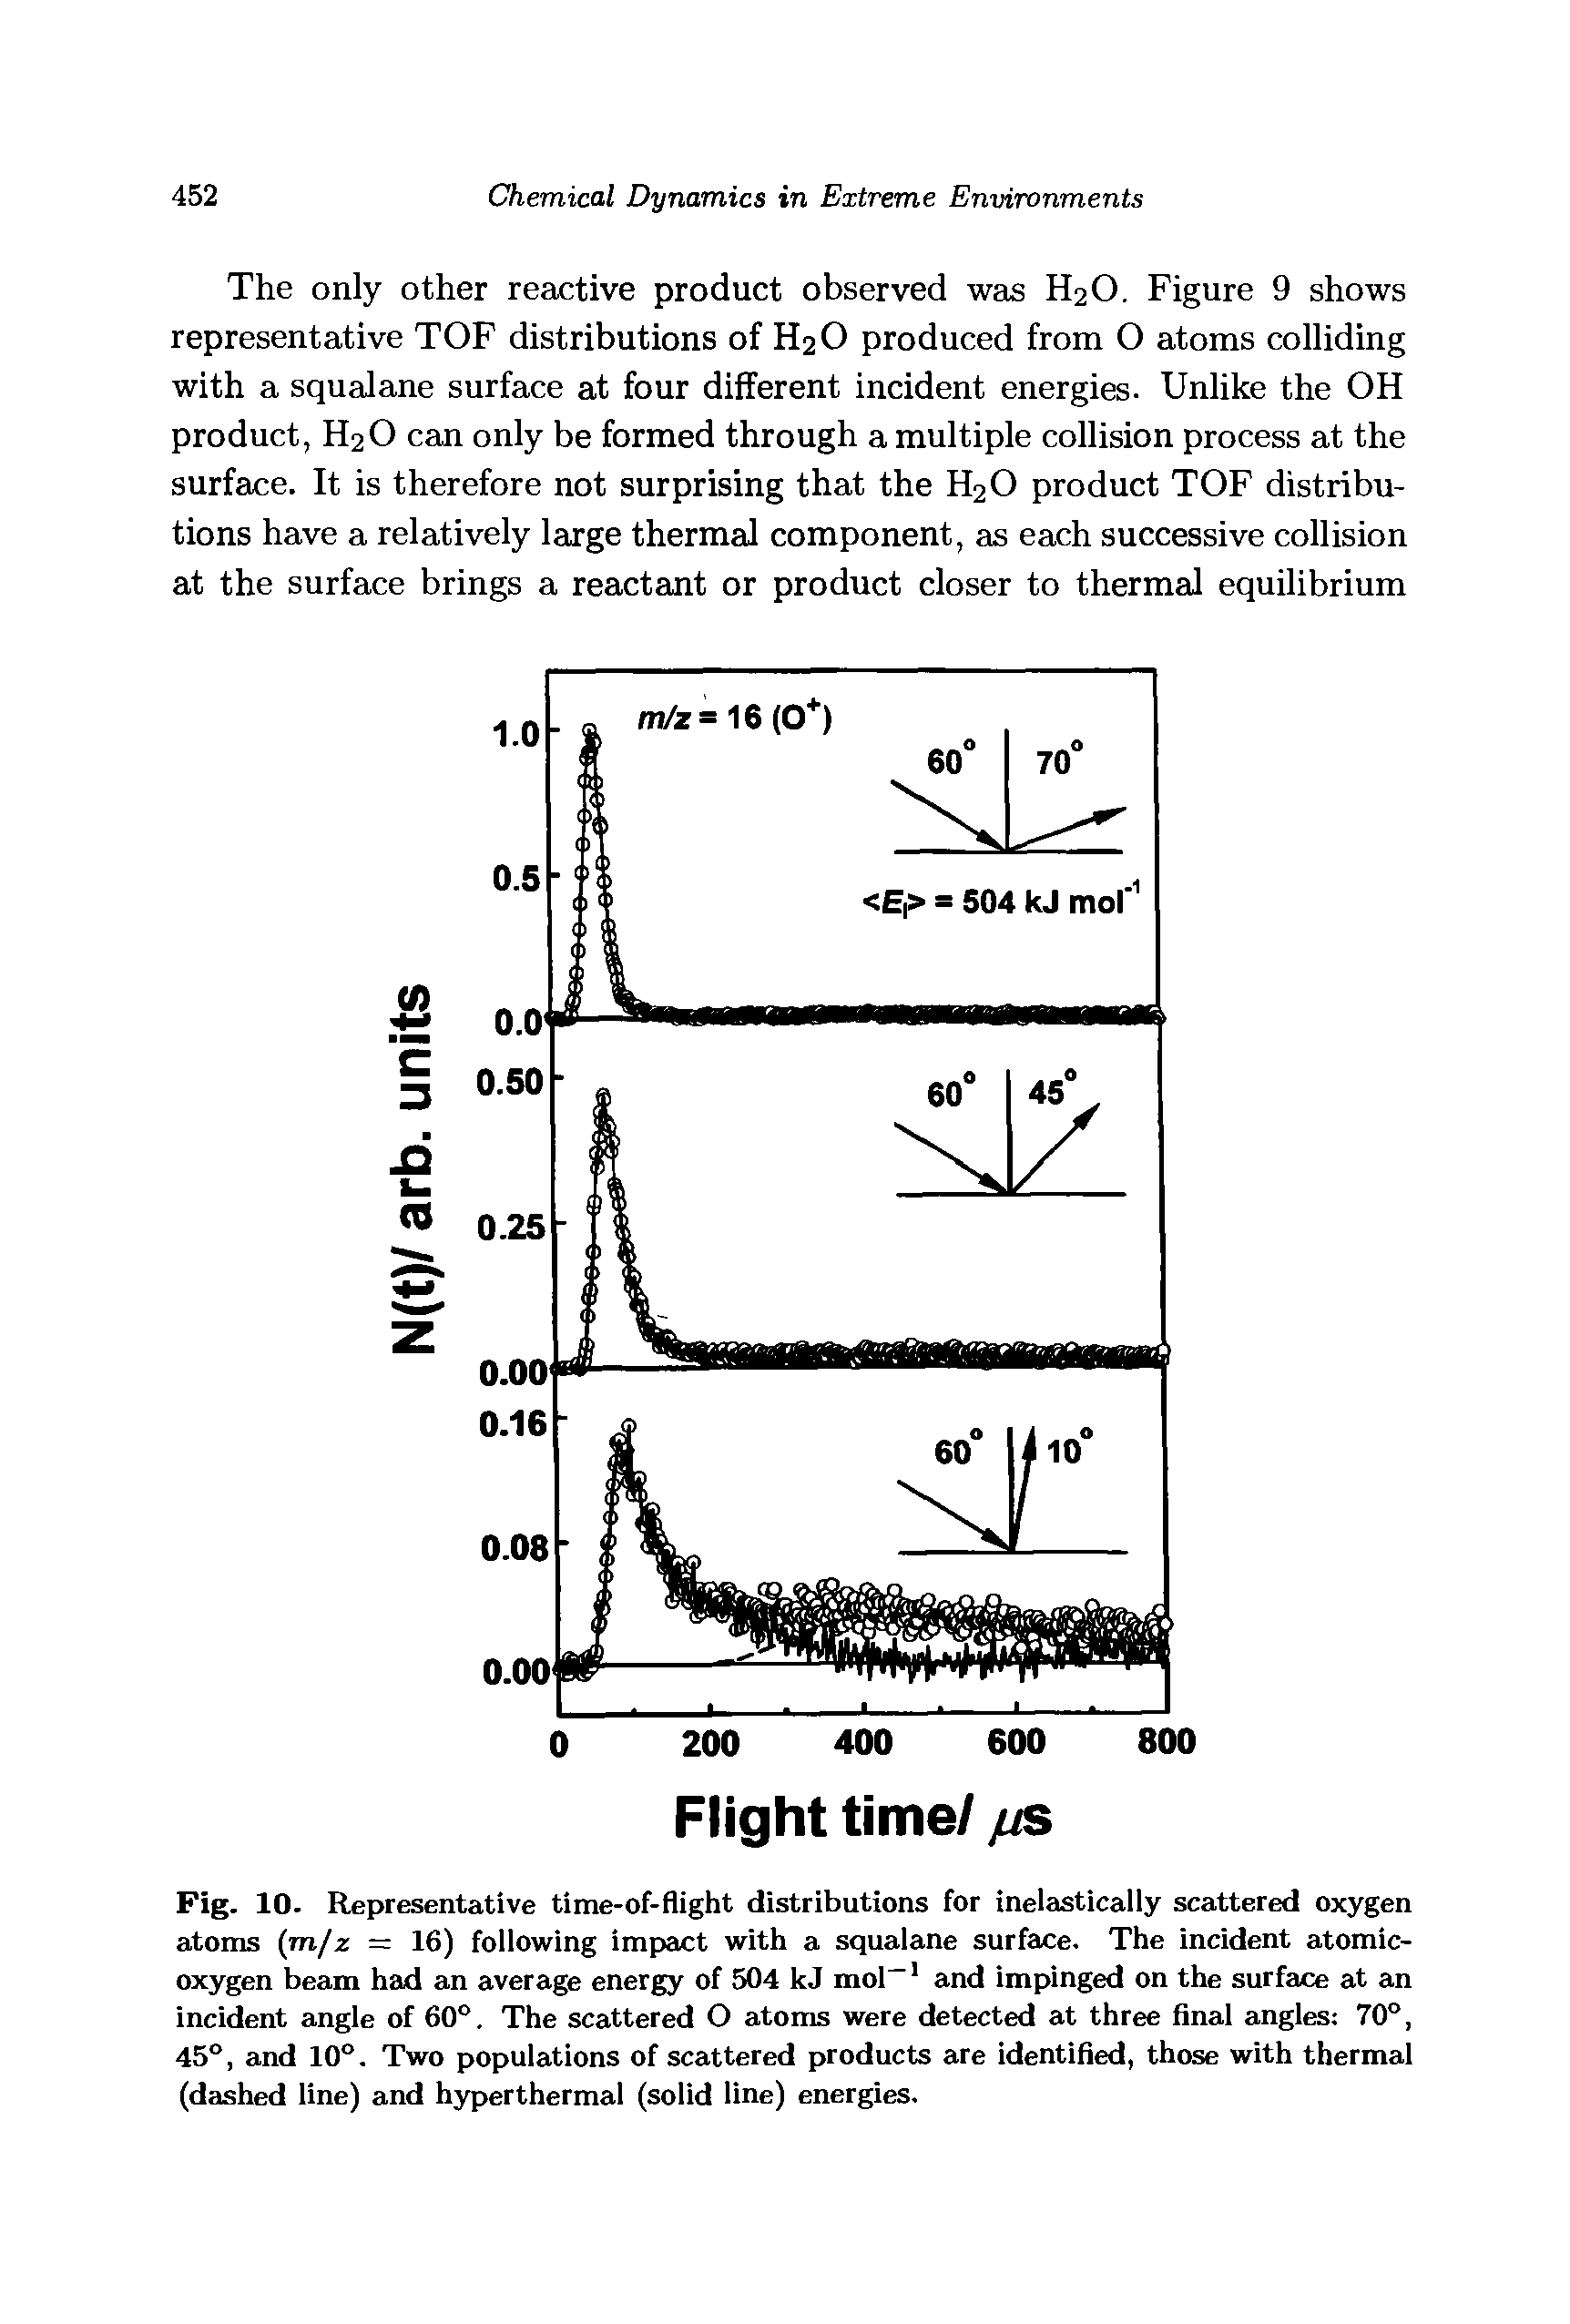 Fig. 10. Representative time-of-flight distributions for inelastically scattered oxygen atoms (rnfz = 16) following impact with a squalane surface. The incident atomic-oxygen beam had an average energy of 504 kJ mol and impinged on the surface at an incident angle of 60°. The scattered O atoms were detected at three final angles 70°, 45°, and 10°. Two populations of scattered products are identified, those with thermal (dashed line) and hyperthermal (solid line) energies.